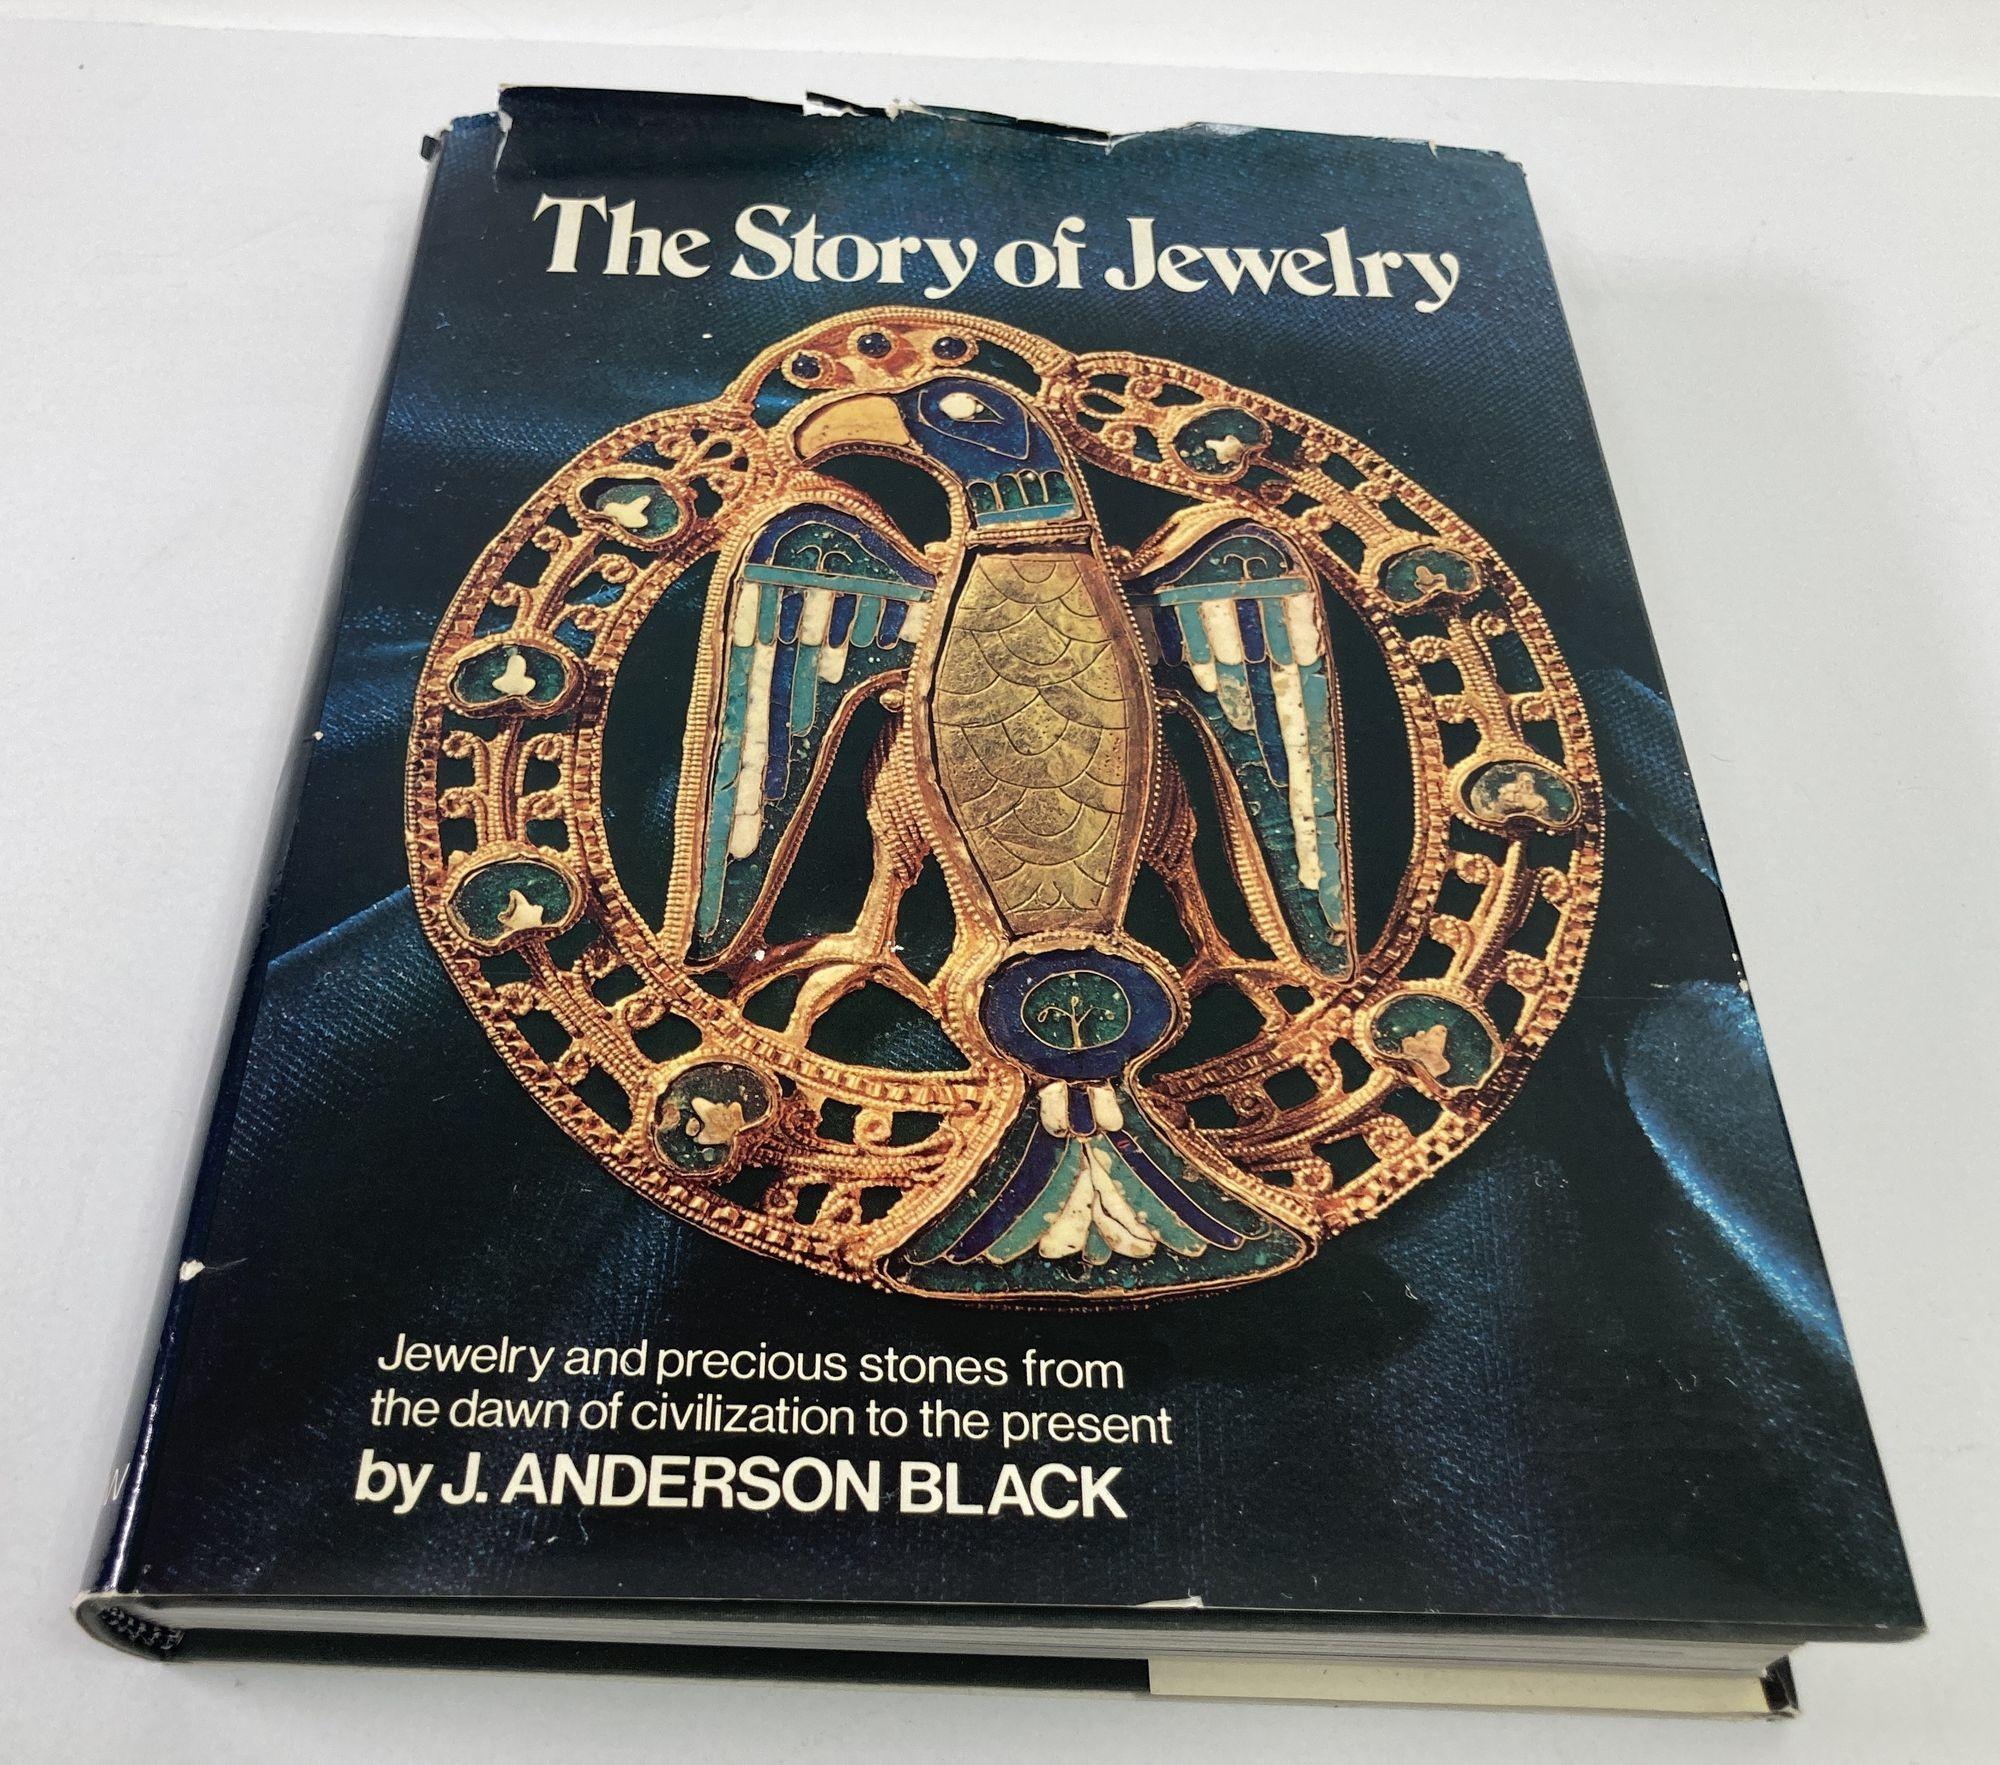 The Story of Jewelry 1973 by J. Anderson. Introduction by Edward Lucie-Smith Black Hardcover Book.
Translate from Italian. J. Anderson Black - Storia dei gioielli
English text.
Documents jewelry's history from the primitive ornaments of